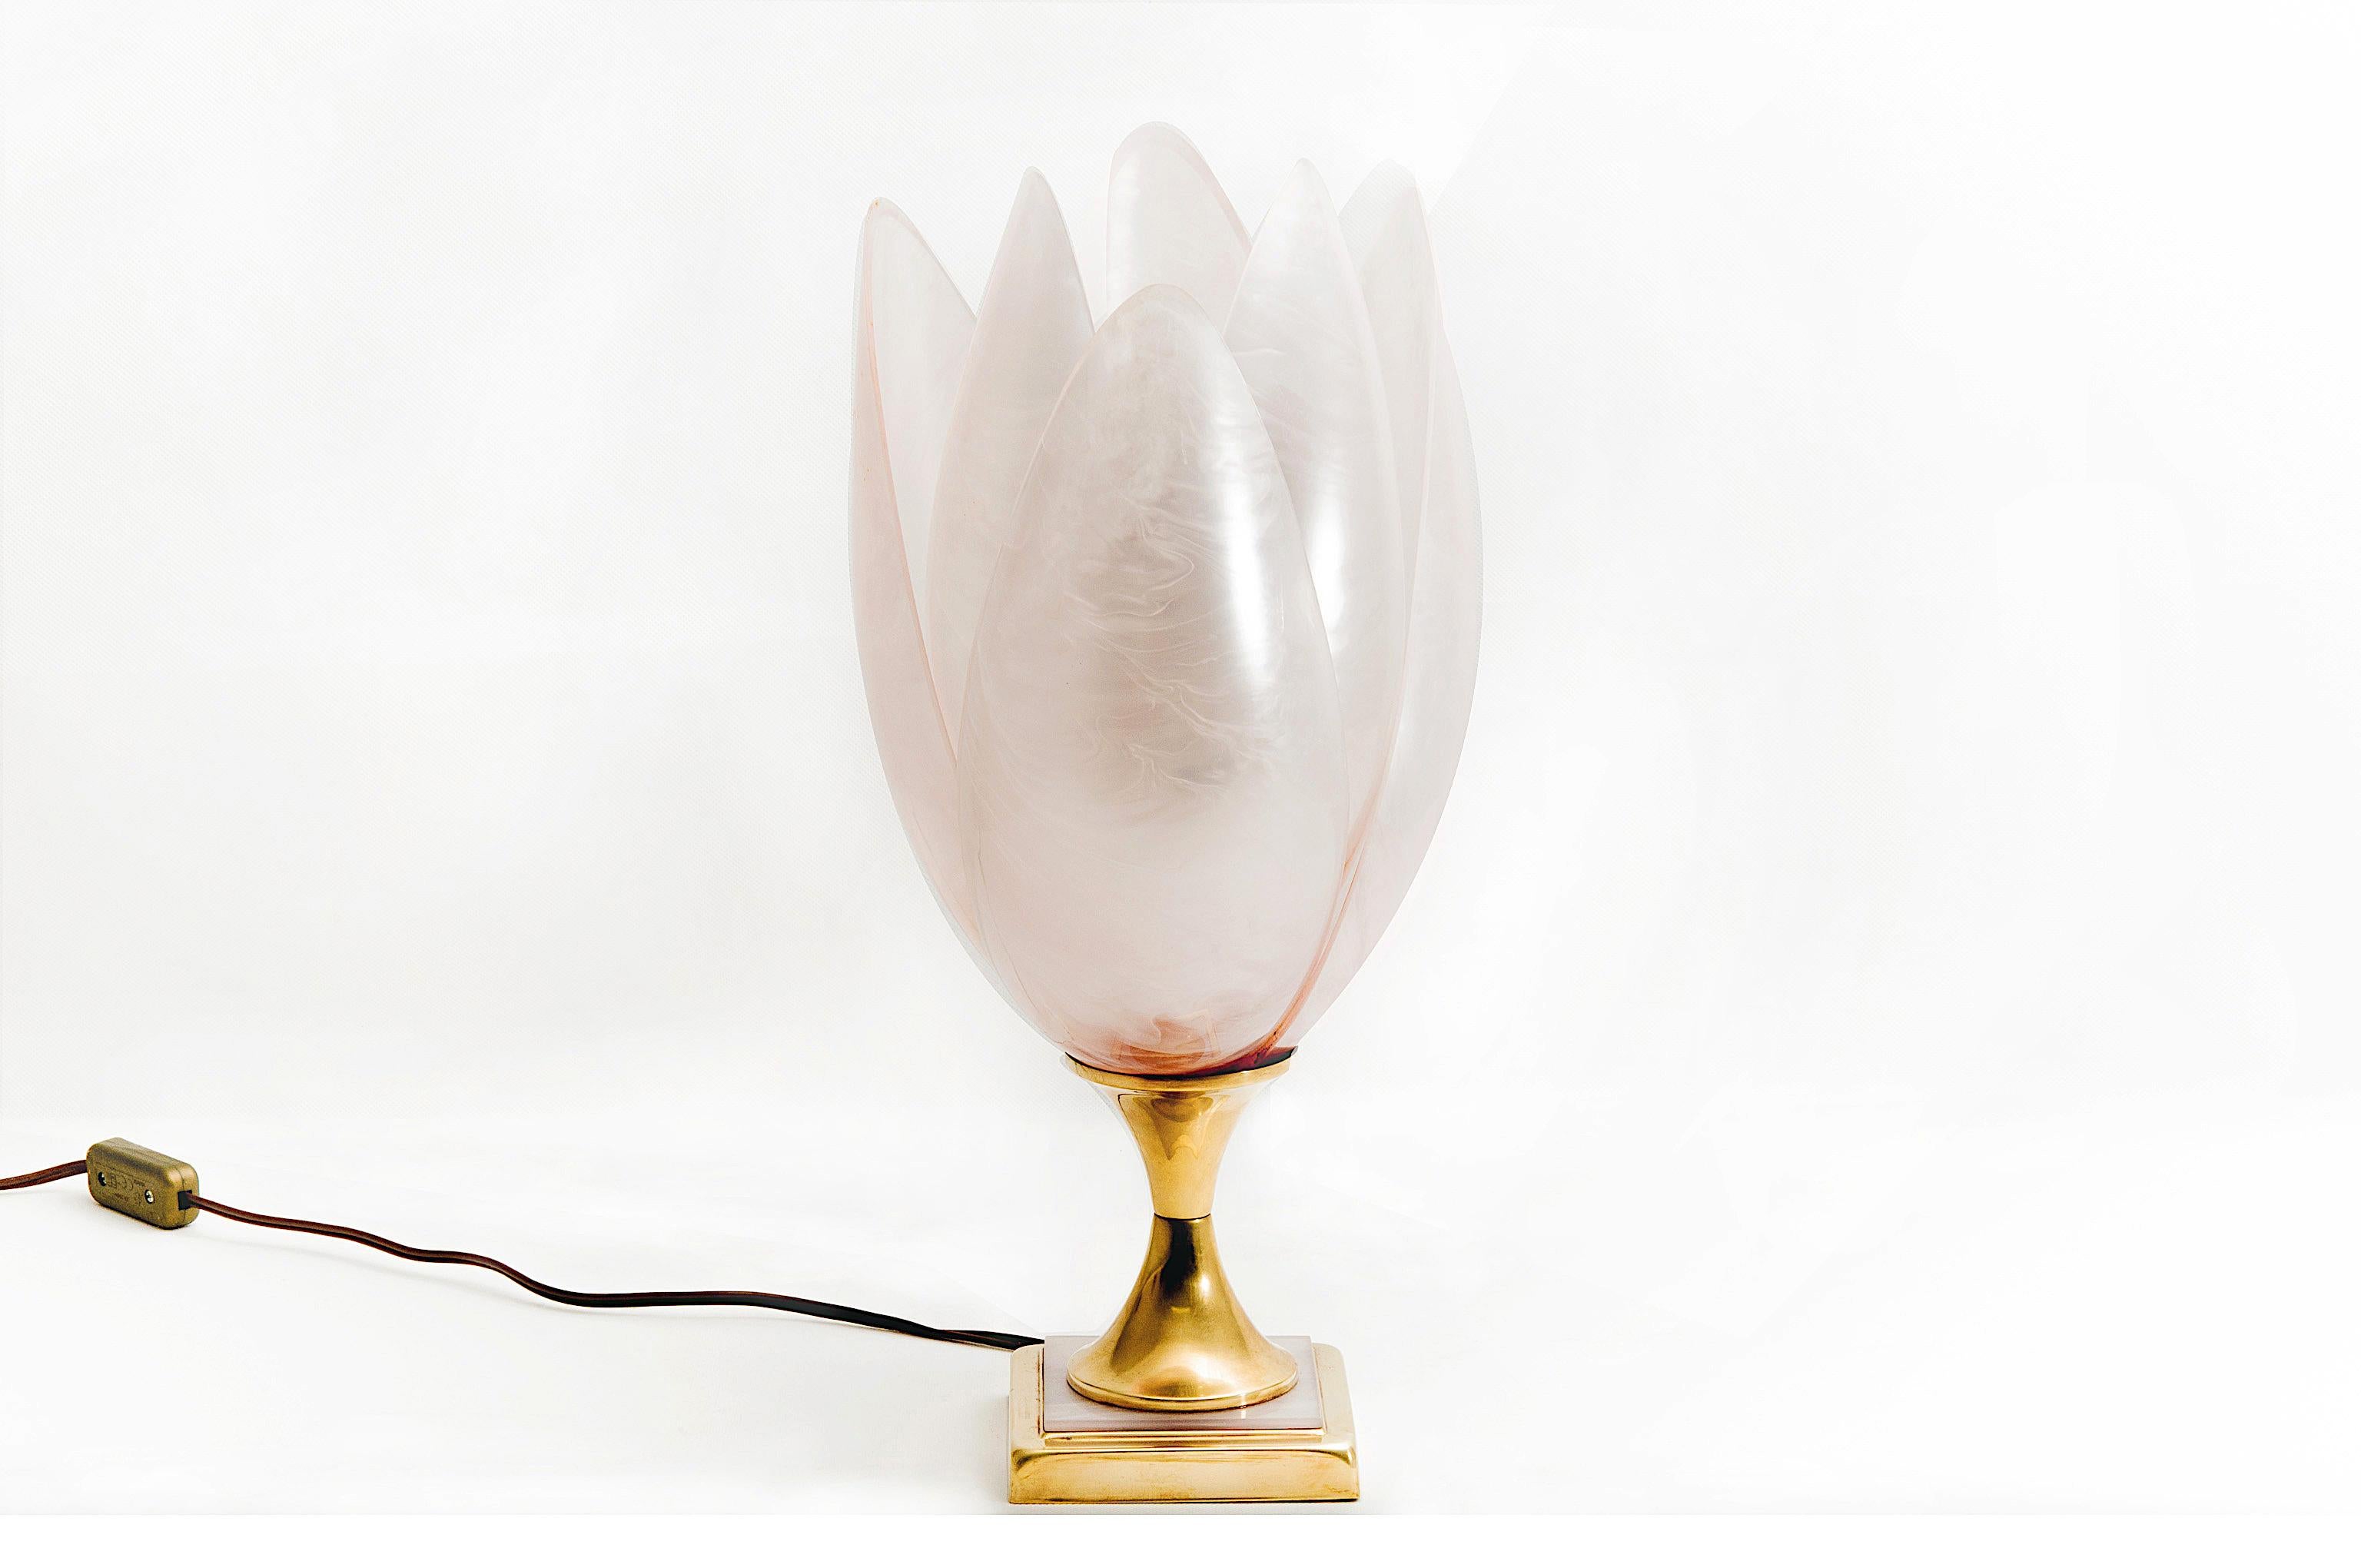 Flower Table Lamp, by Rougier, 6 Petals Model, Pink Color, 1970 France, in Resin 1